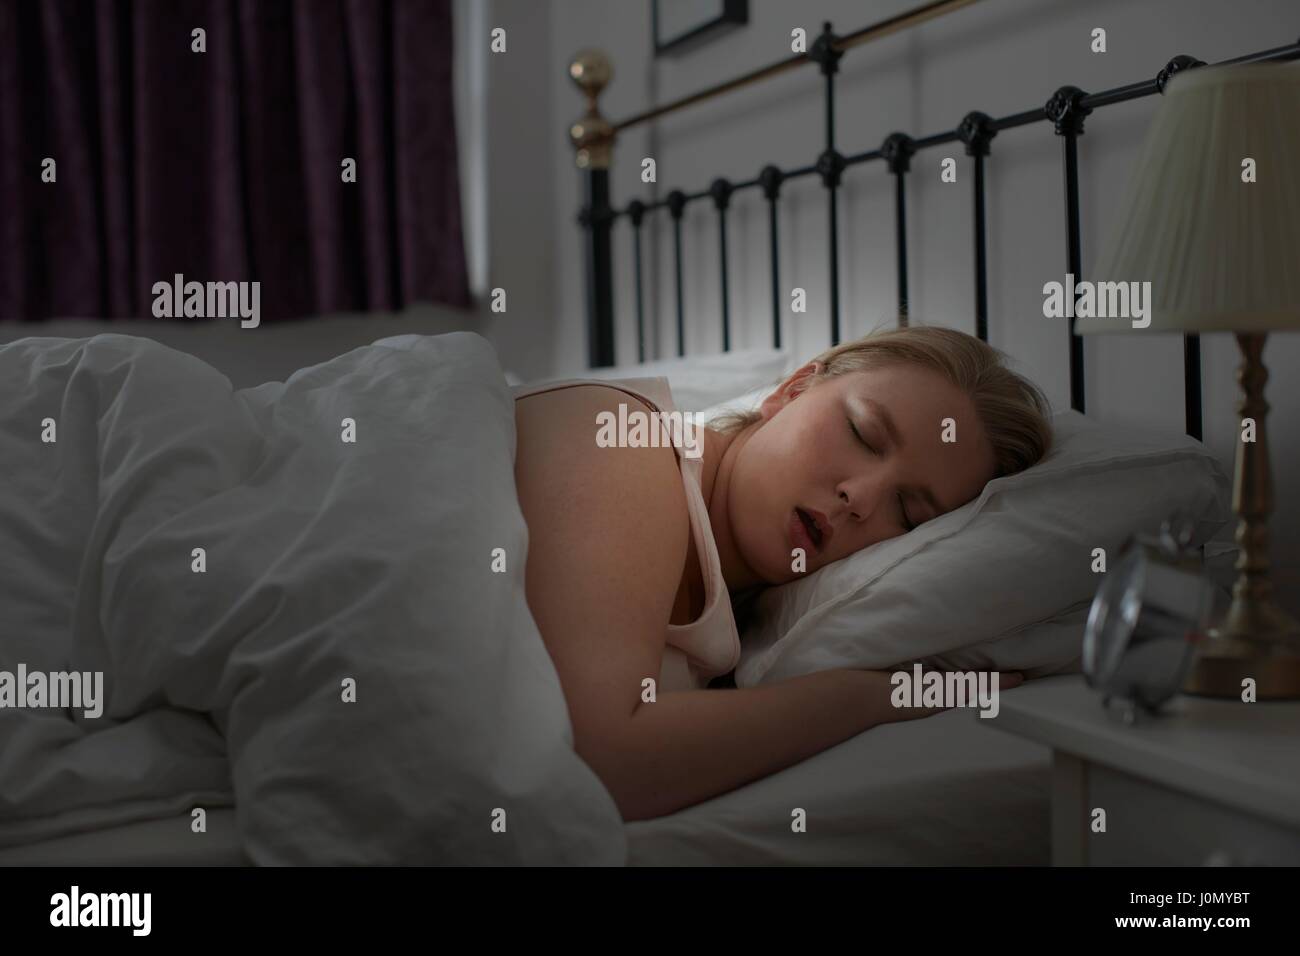 Young woman asleep in bed. Stock Photo